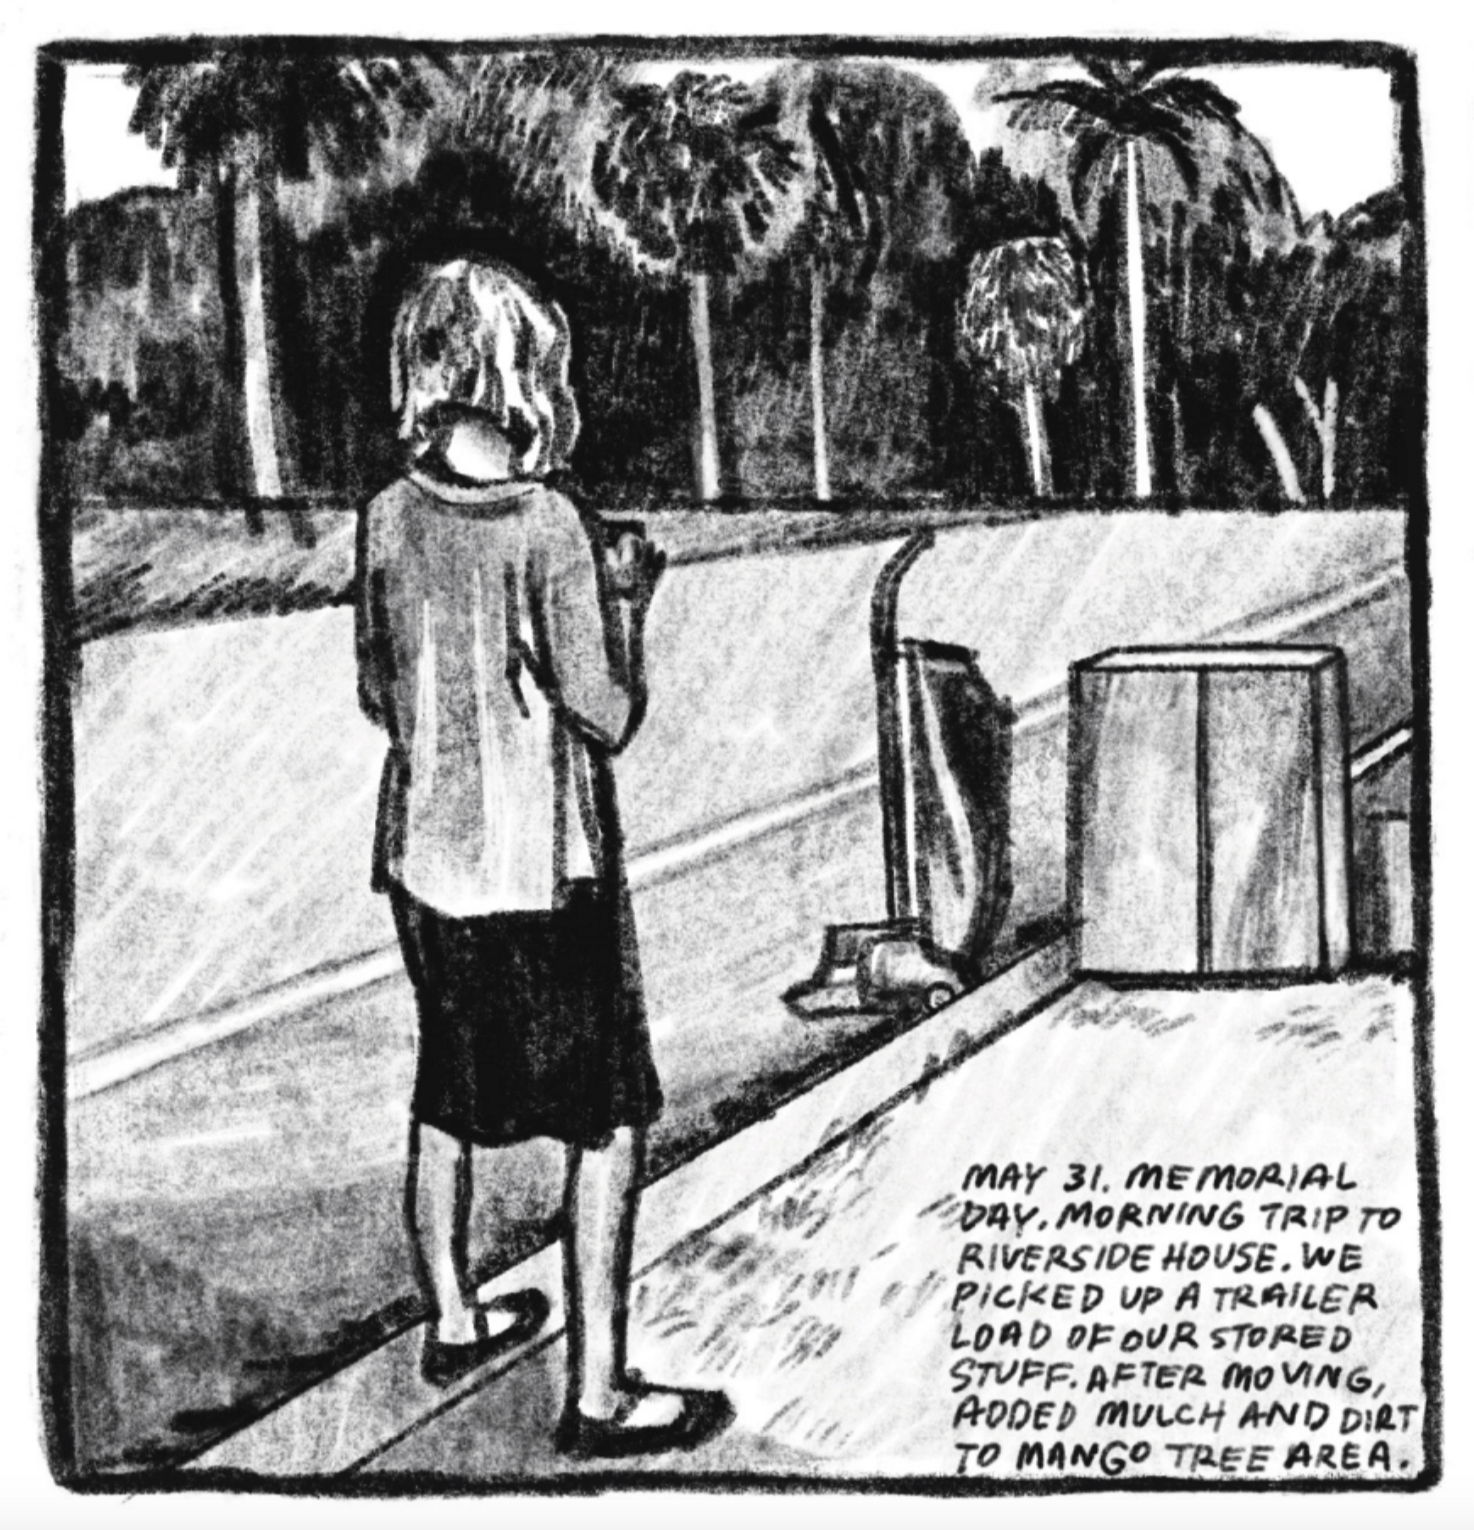 5. We see Kim from behind. Her hair is down and she is wearing a long-sleeved blouse, a knee-length skirt, and flats. She stands in some grass on the side of a road. IN front of her A dolly and a large moving box. In the background are palm trees on the other side of the road. â€œMay 31. Memorial Day. Morning trip to Riverside House. We picked up a trailer load of our stored stuff. After moving, added mulch and dirt to mango tree area.â€